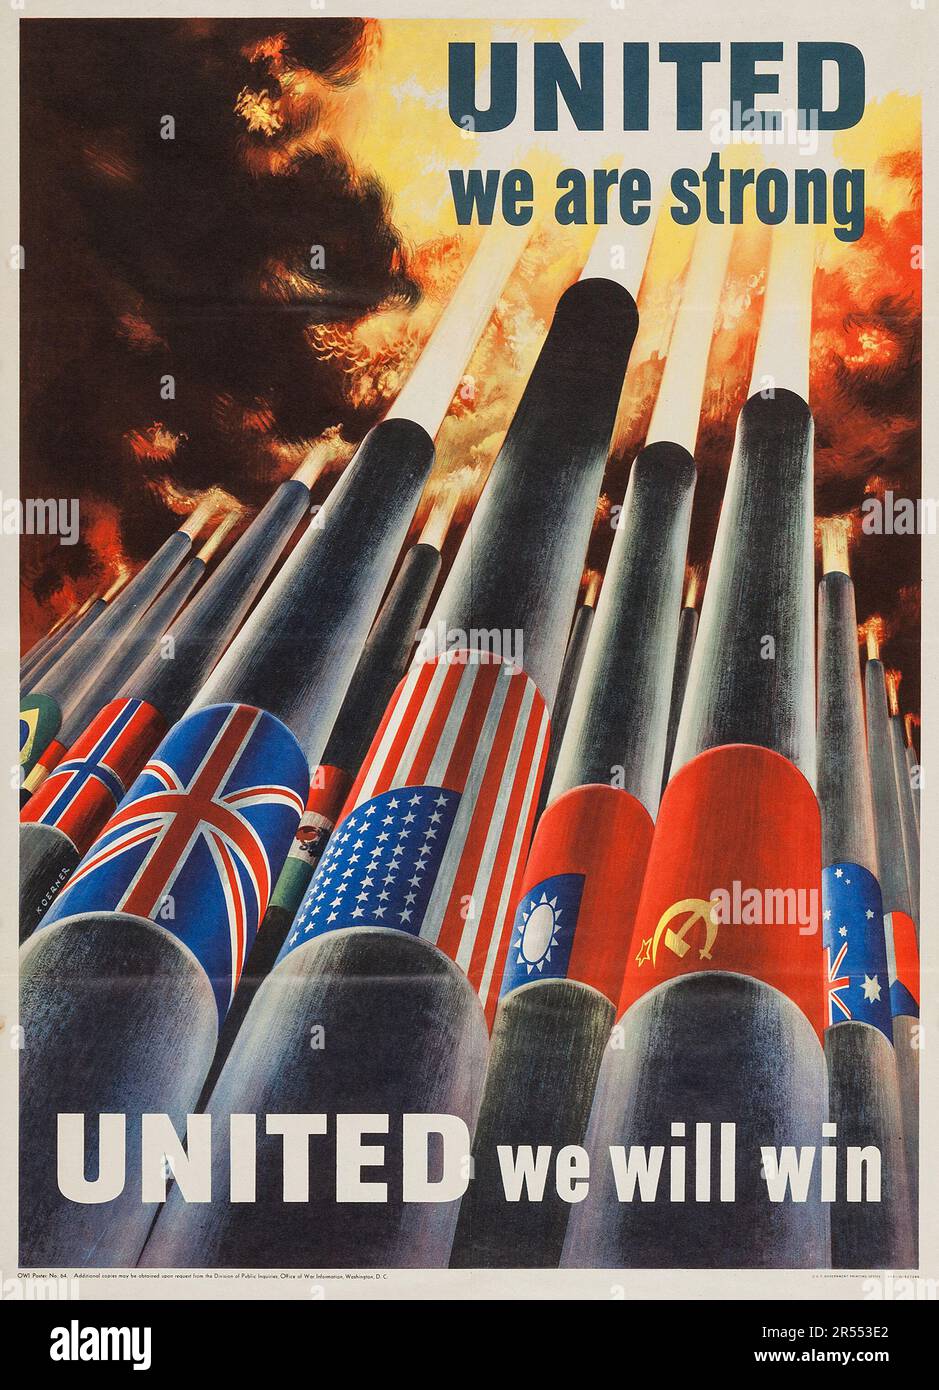 American World War II Propaganda (U.S. Government Printing Office, 1943). 'United We Are Strong' feat cannons firing Stock Photo